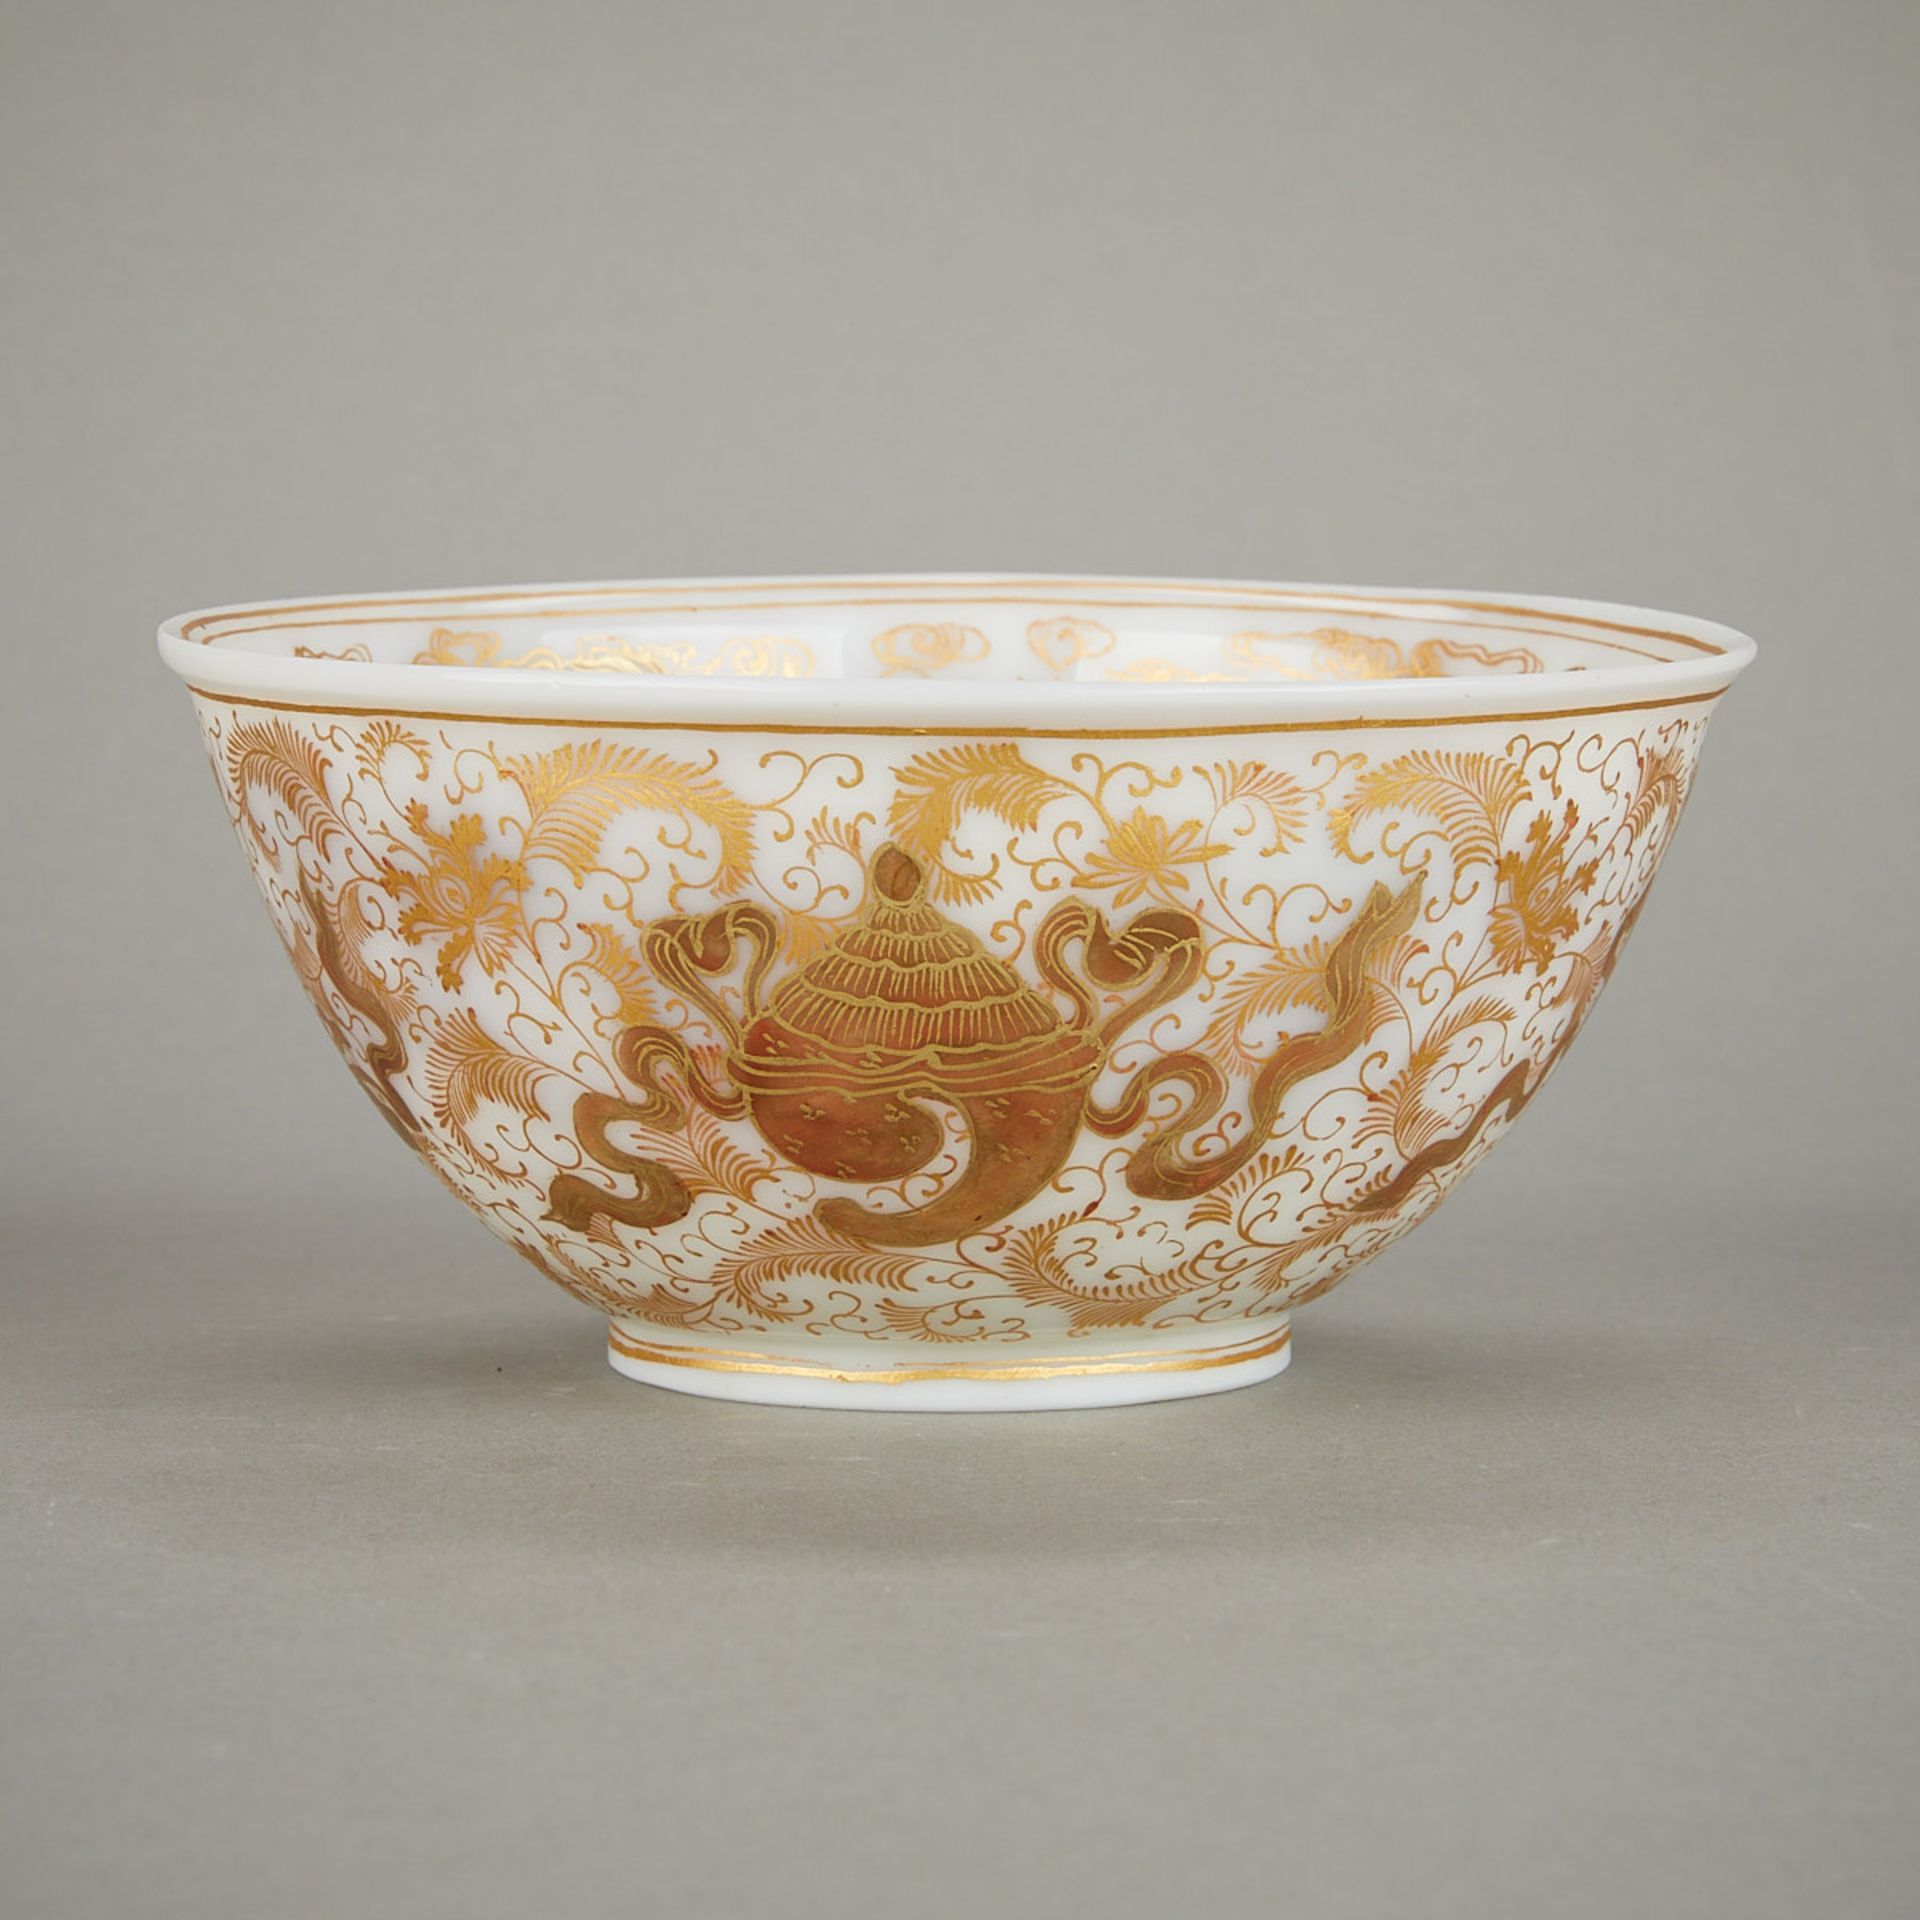 Rare Chinese Gilt Semi-Opaque White Glass Bowl - Image 4 of 16